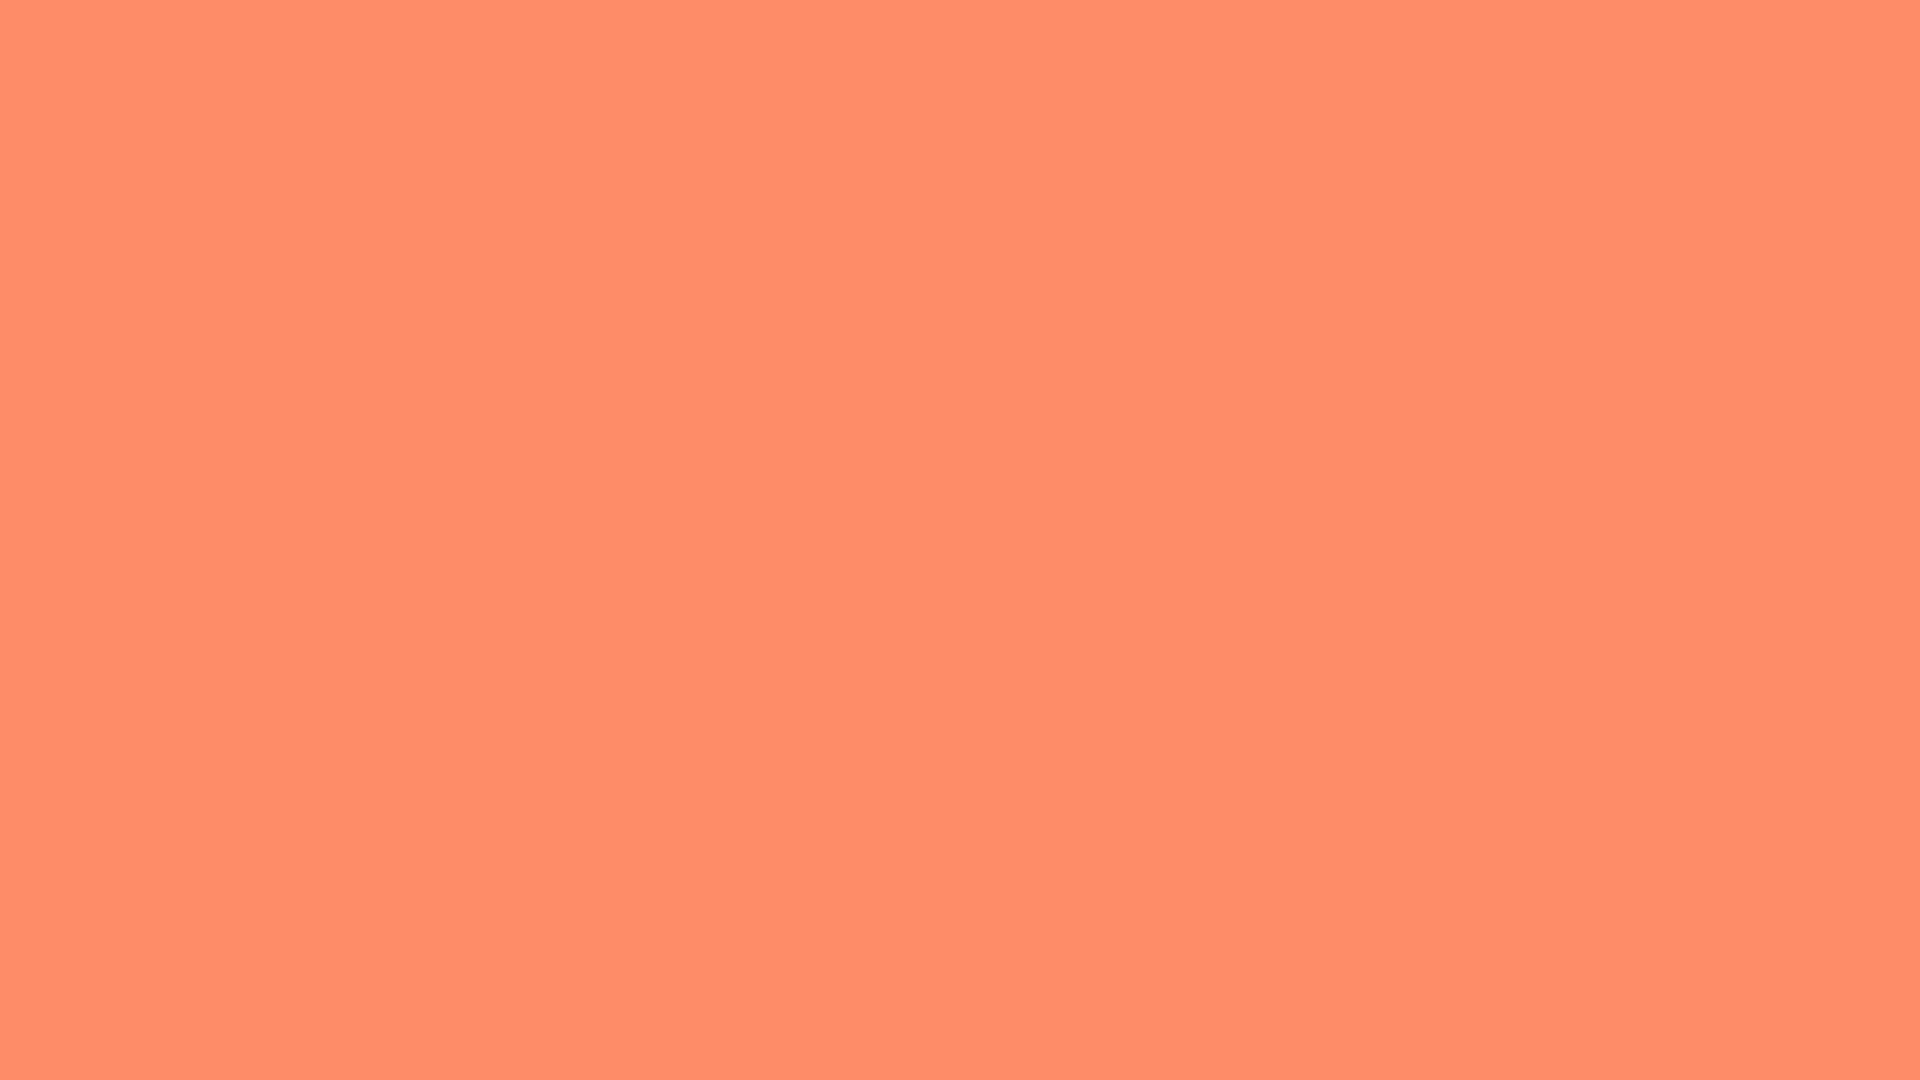 1920x1080 Salmon Solid Color Background